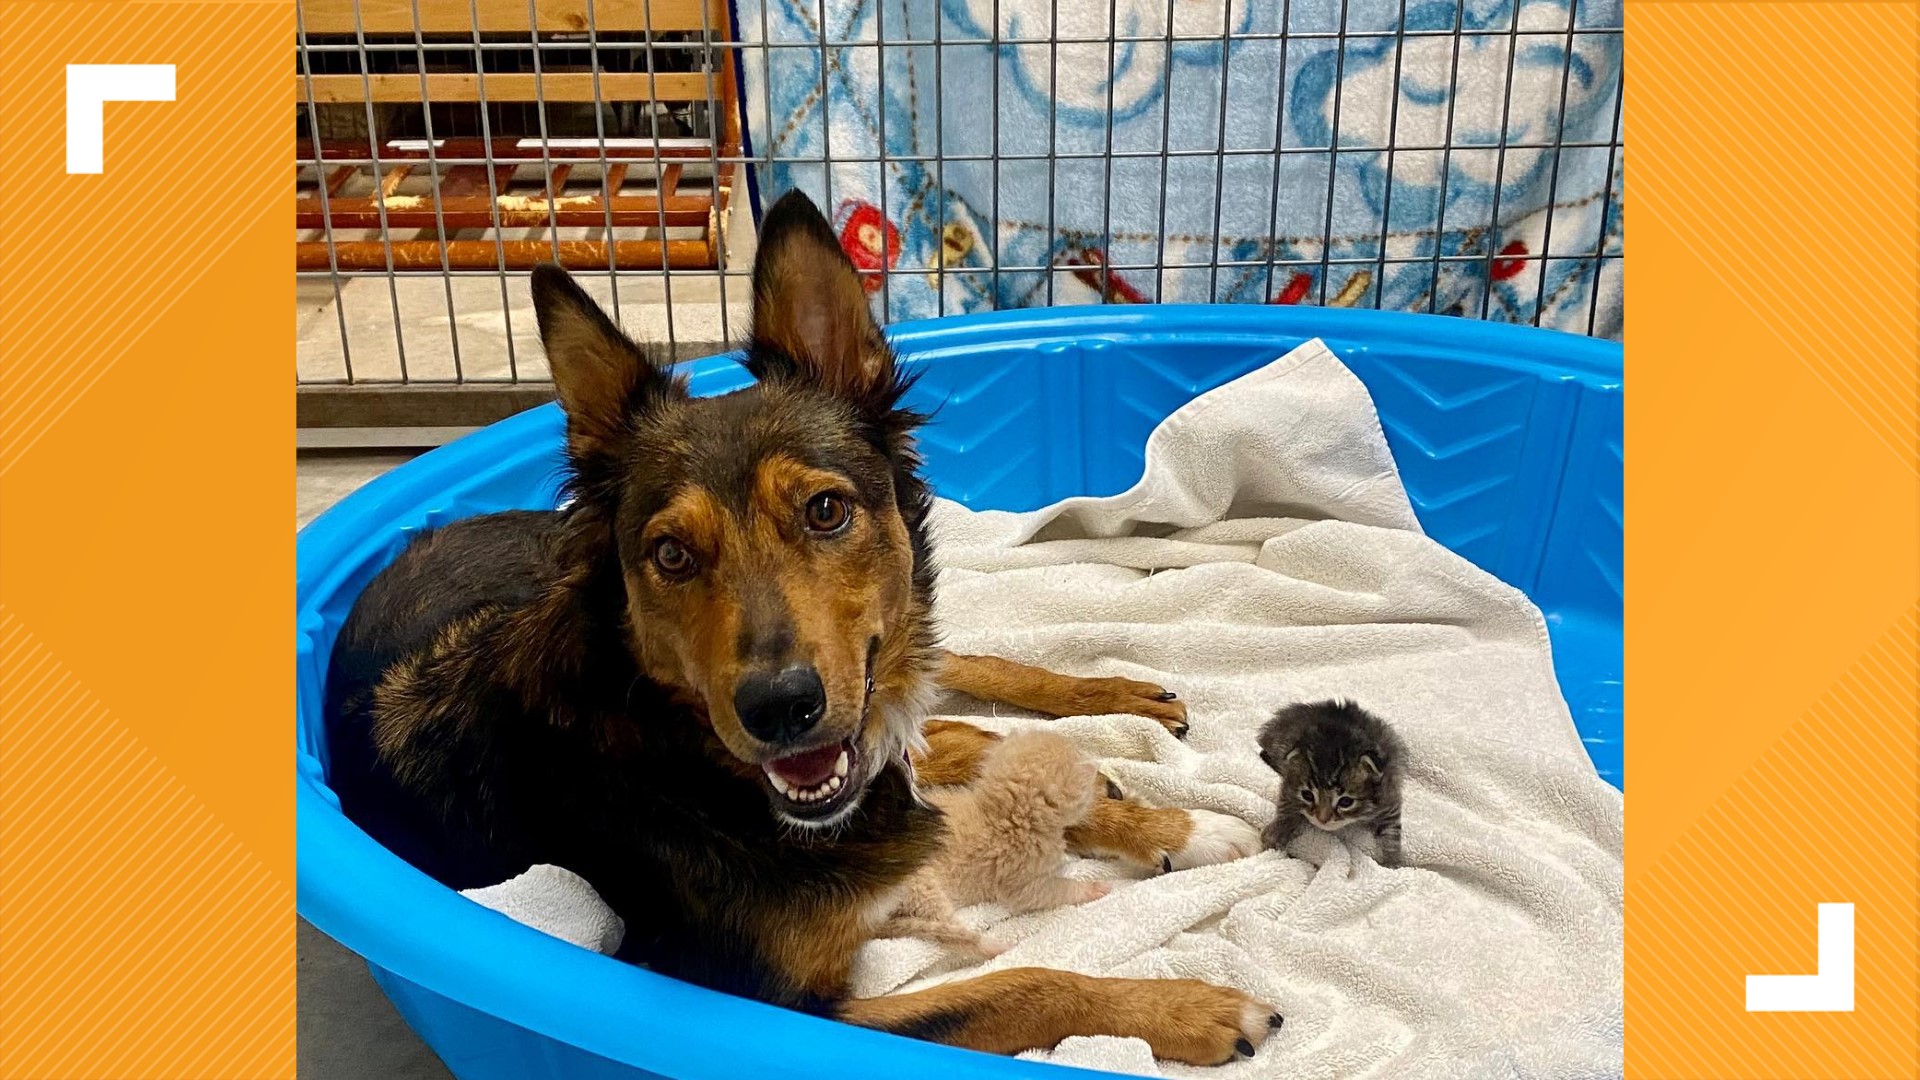 Mother dog 'adopts' orphaned kittens after losing her puppies | 12news.com